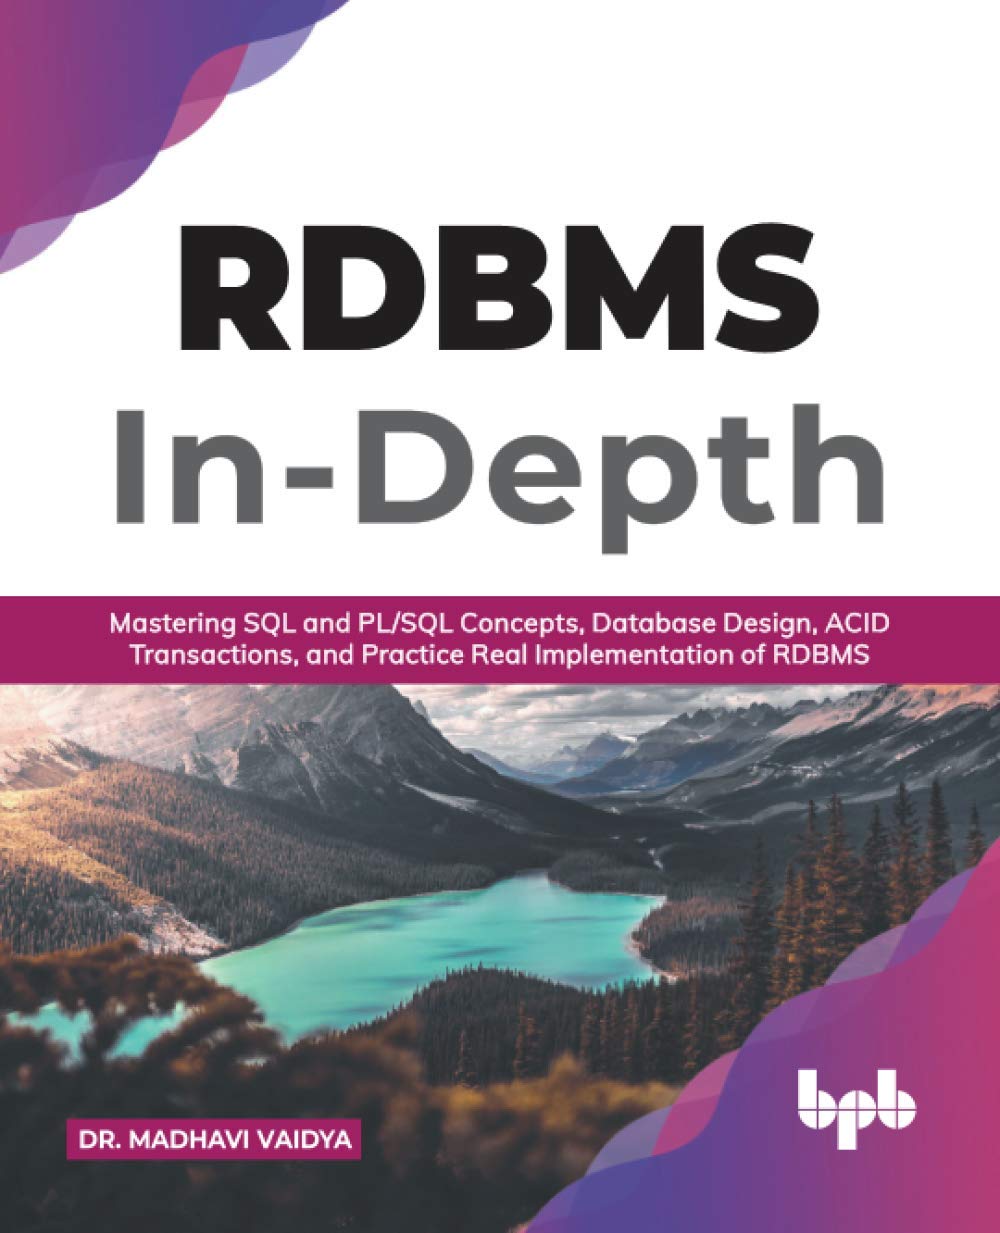 RDBMS In-Depth: Mastering SQL and PL/SQL Concepts, Database Design, ACID Transactions, and Practice Real Implementation of RDBM by Dr. Madhavi Vaidya 